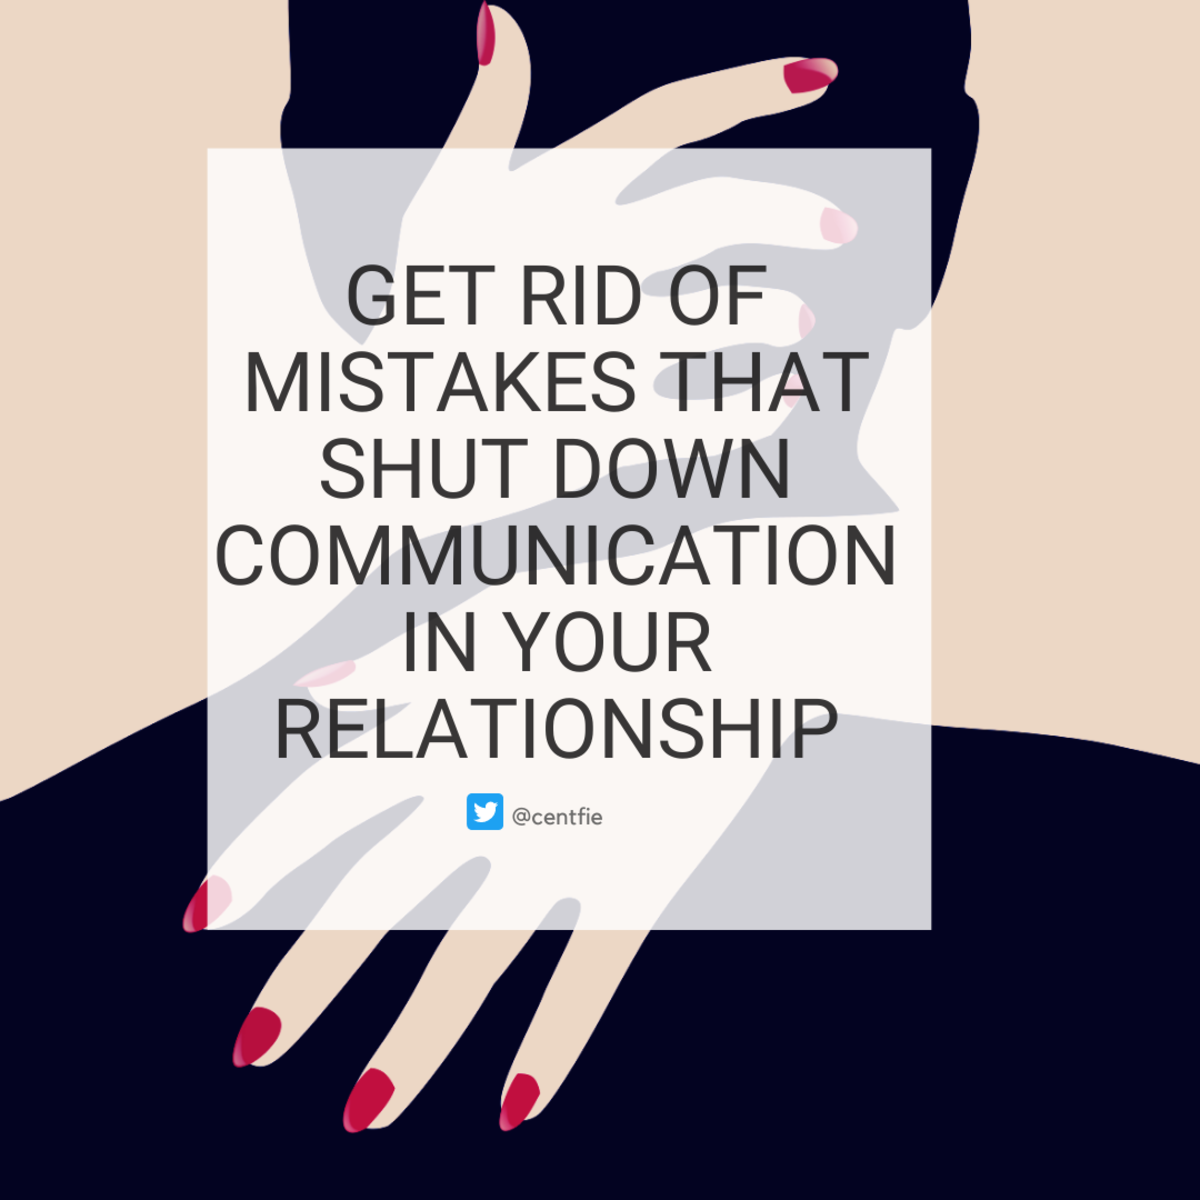 10 Relationship Mistakes That Shut Down Communication